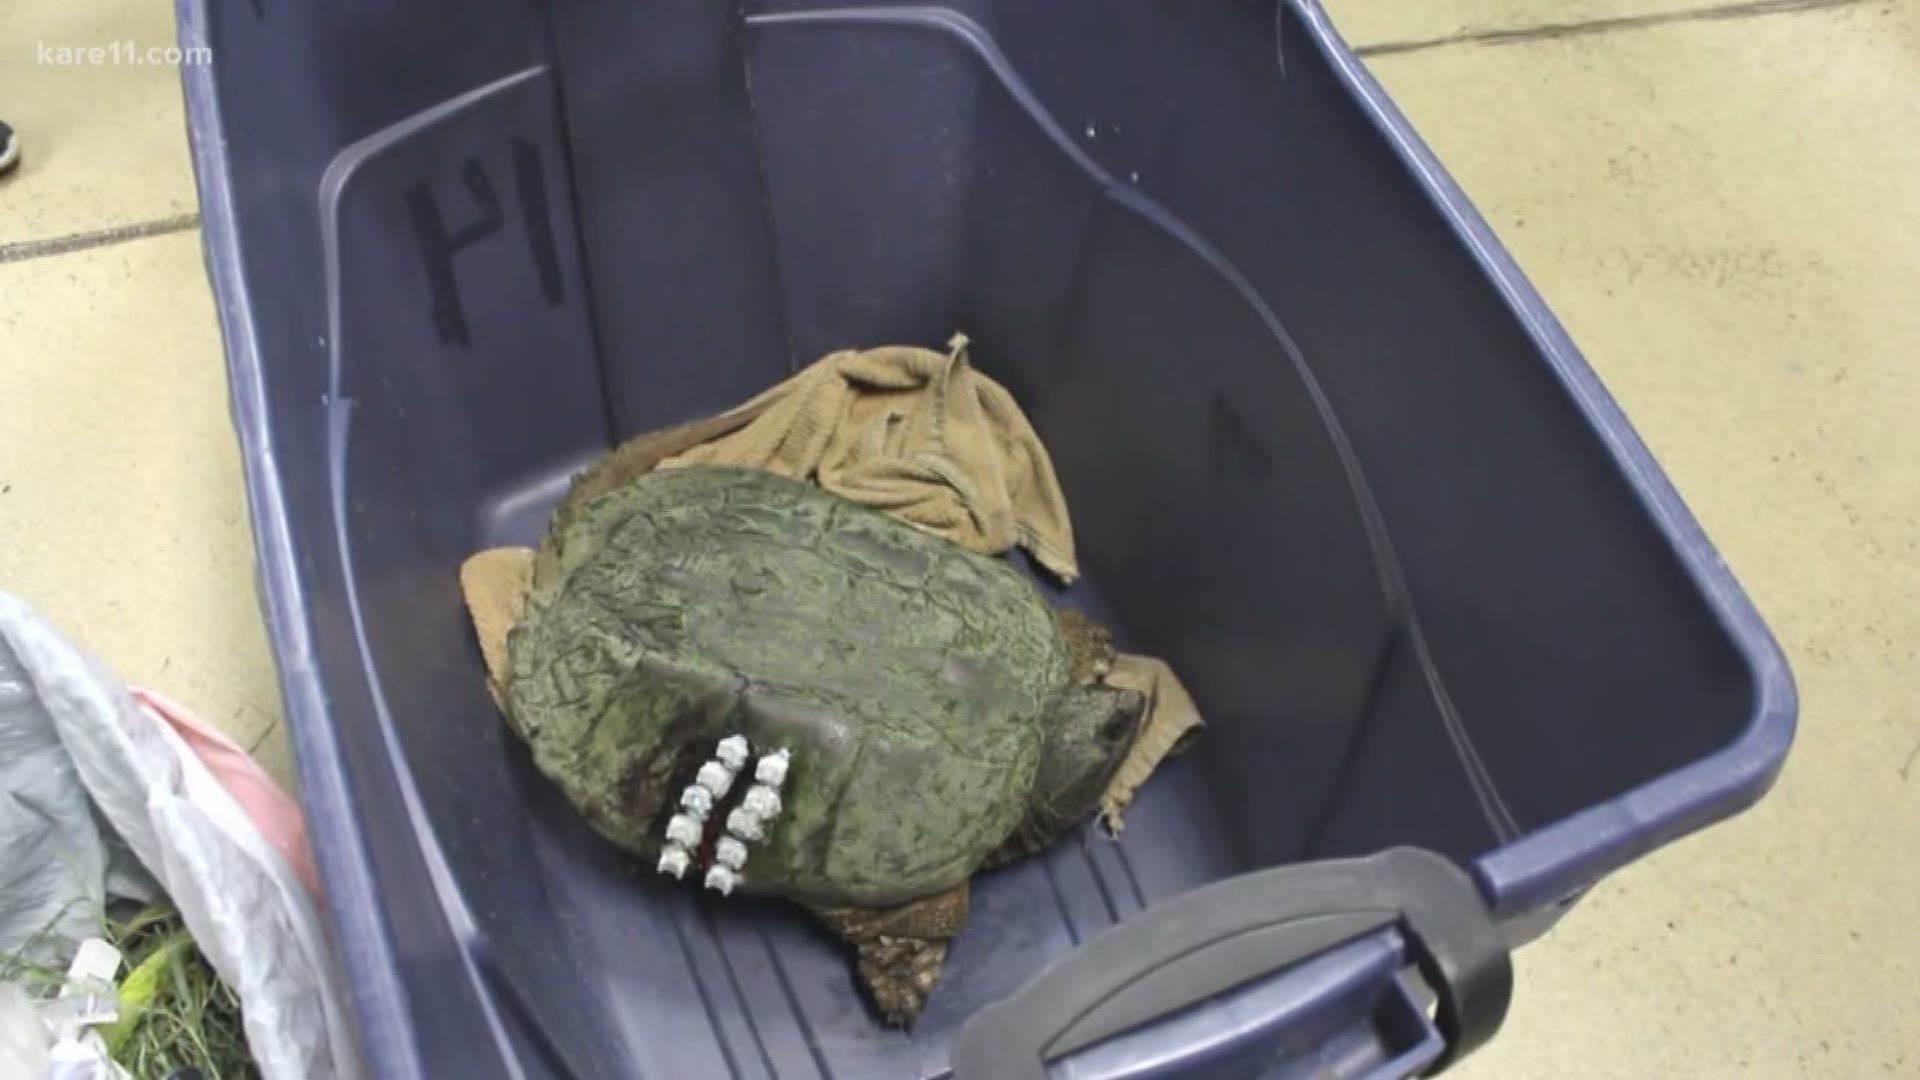 Wildlife officials highlight safe turtle crossings